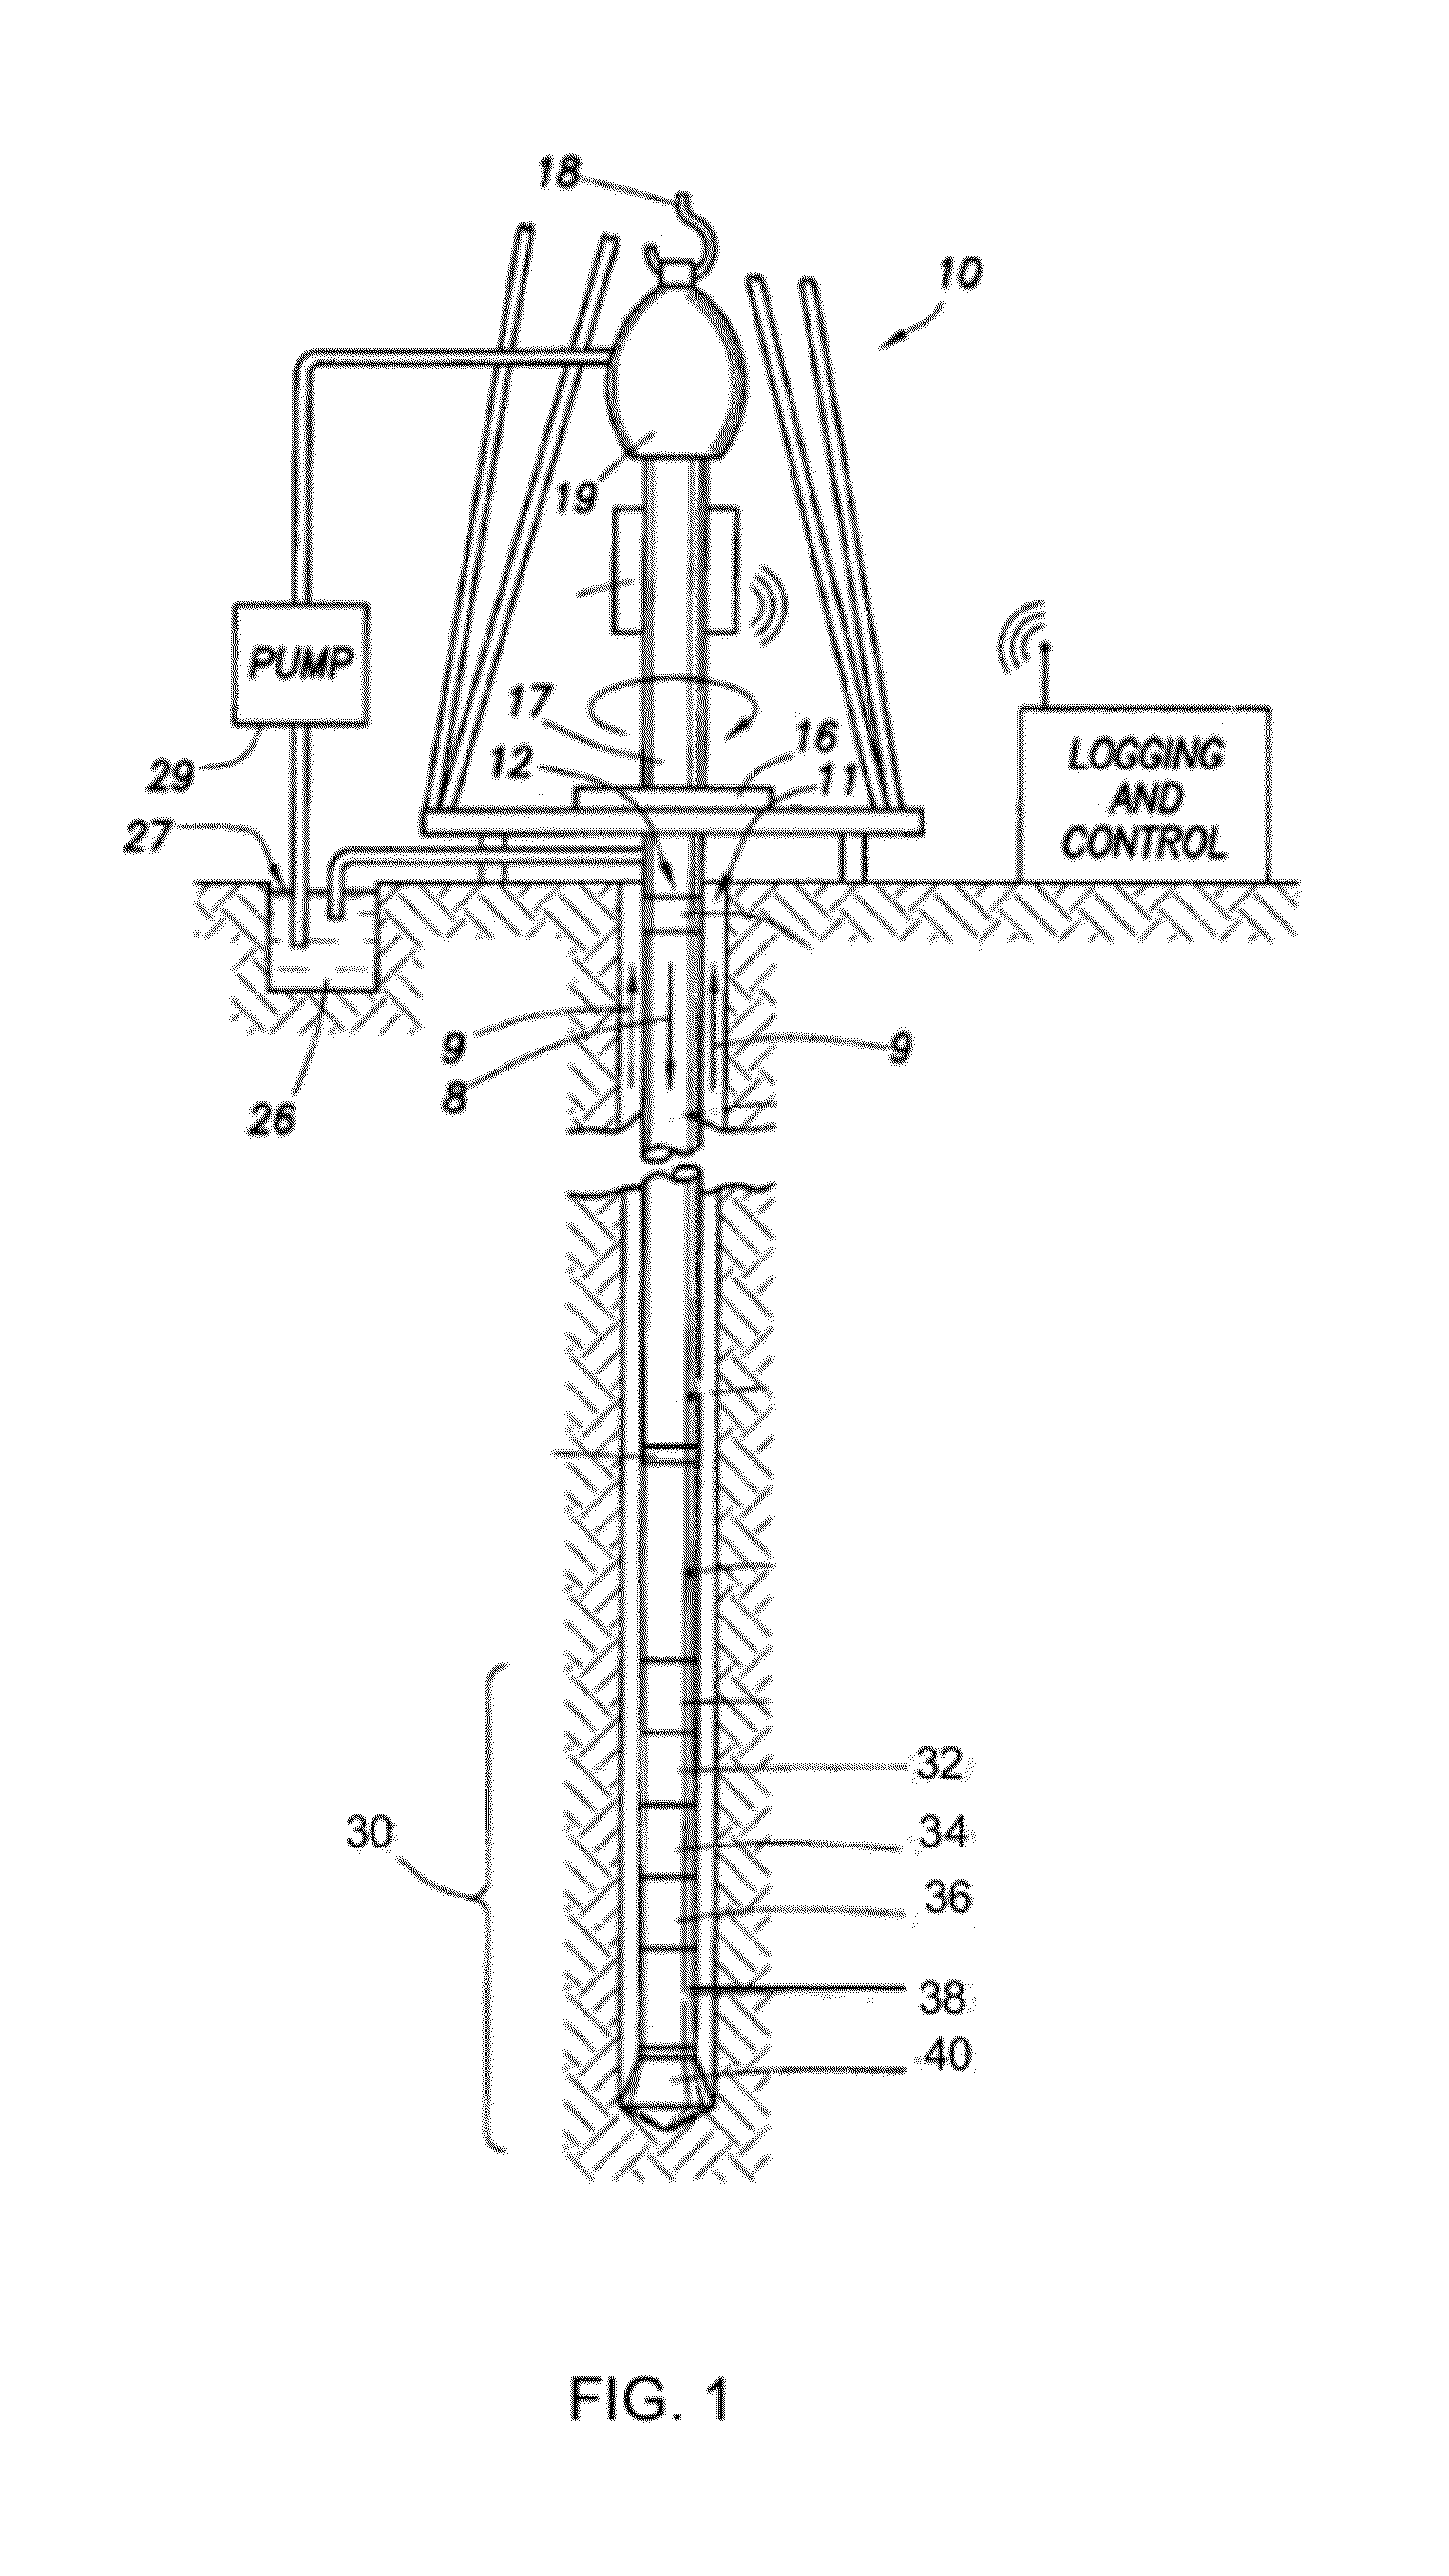 Apparatus and methods to analyze downhole fluids using ionized fluid samples